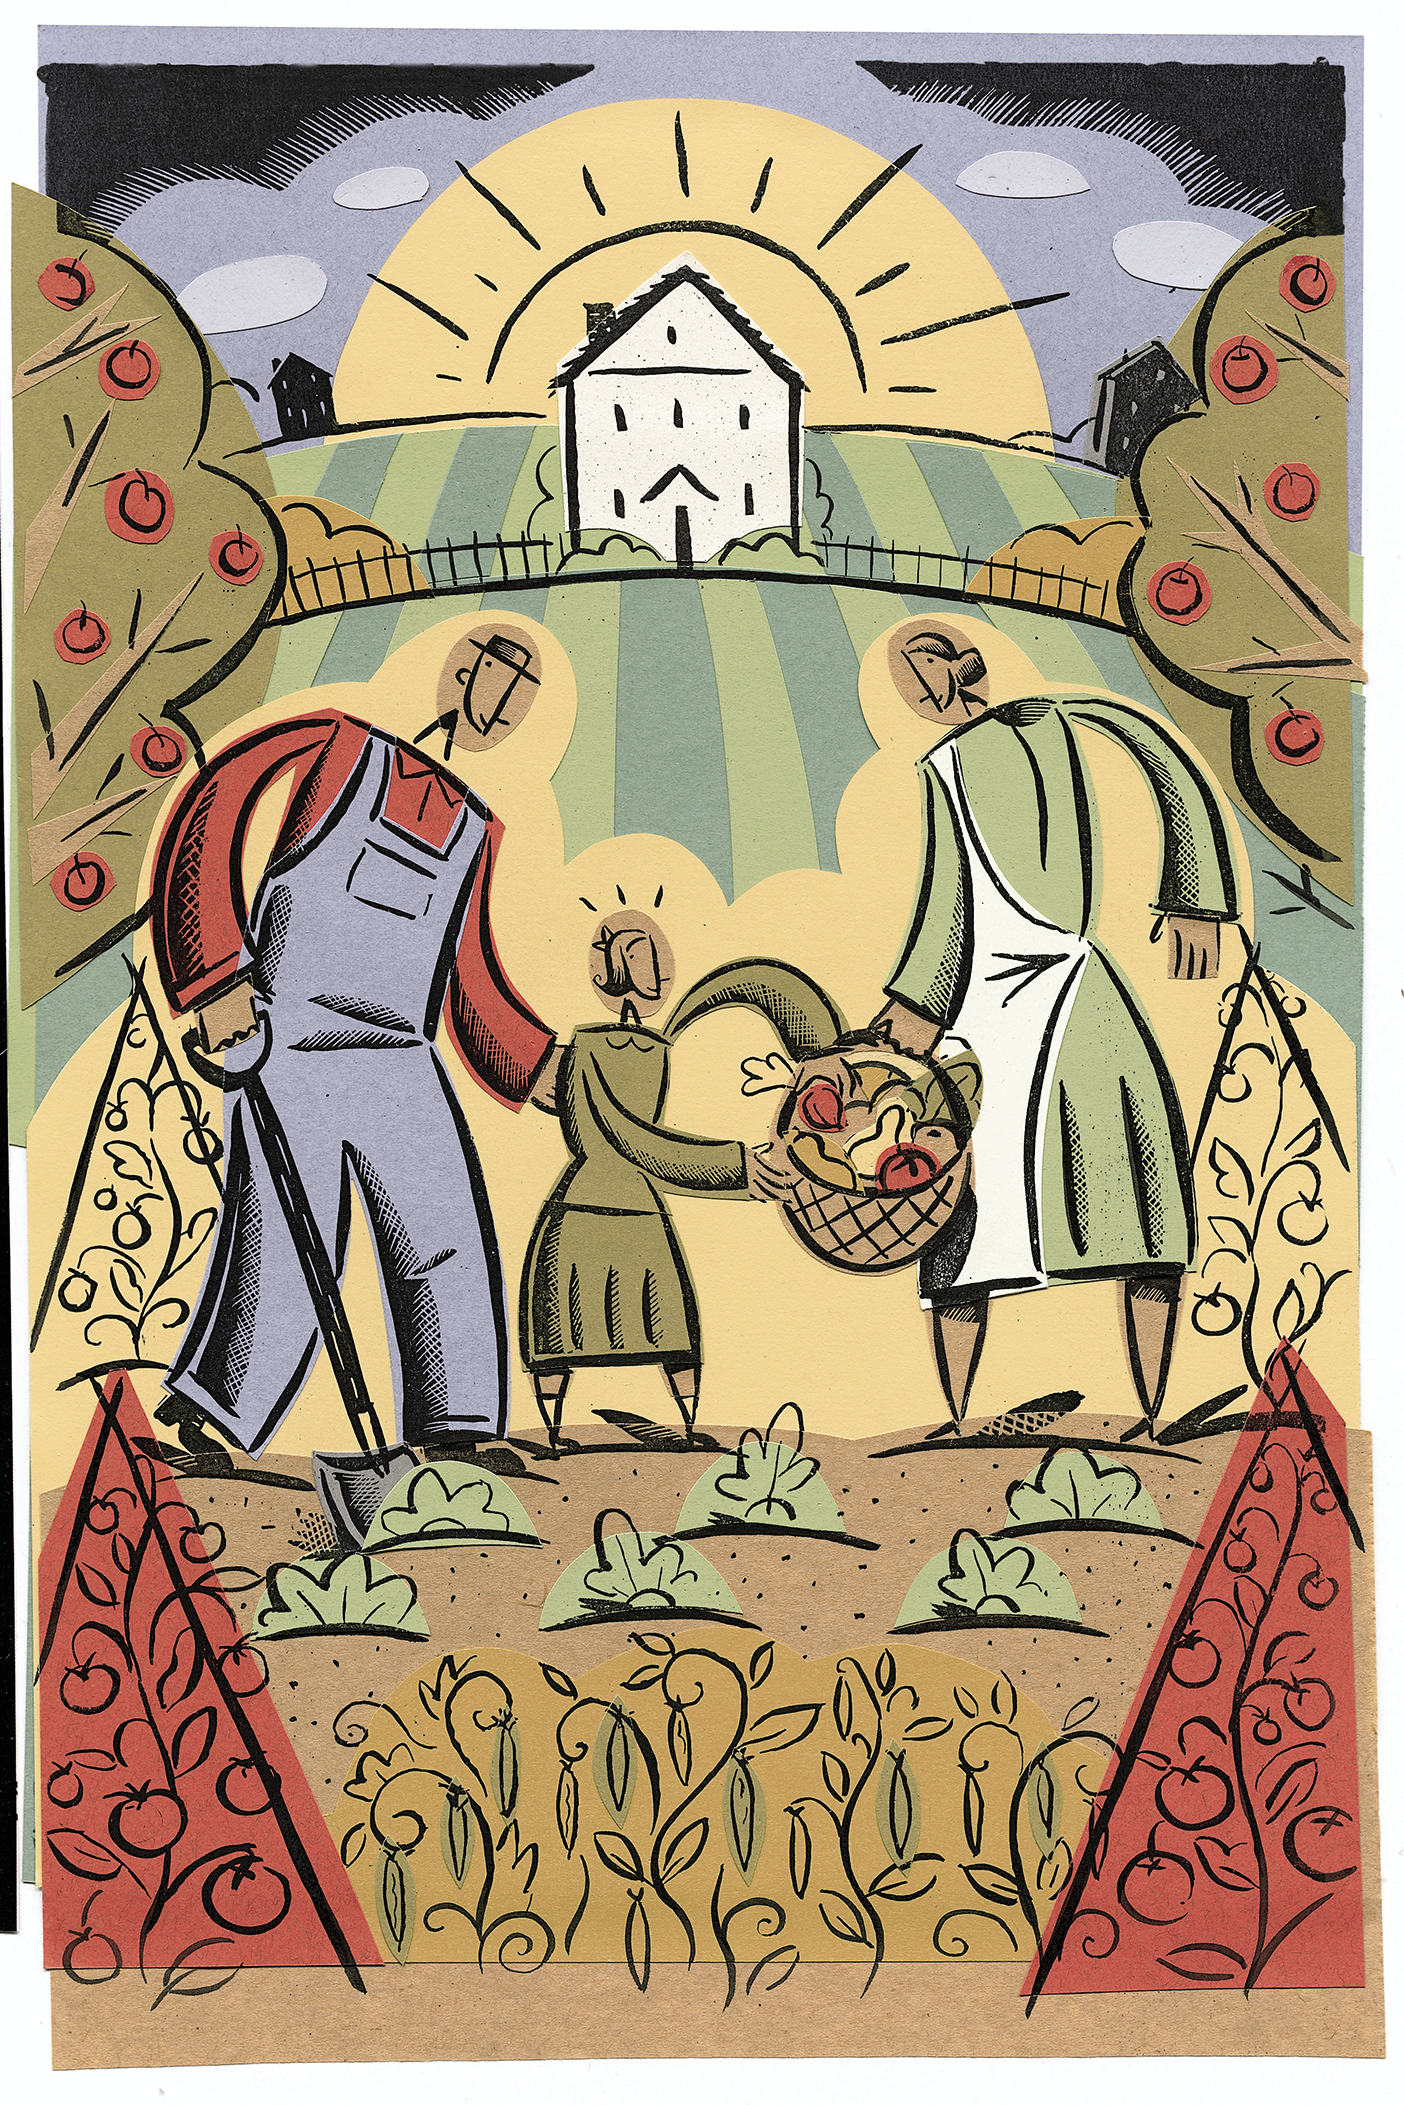 Illustration of a family picking apples together.